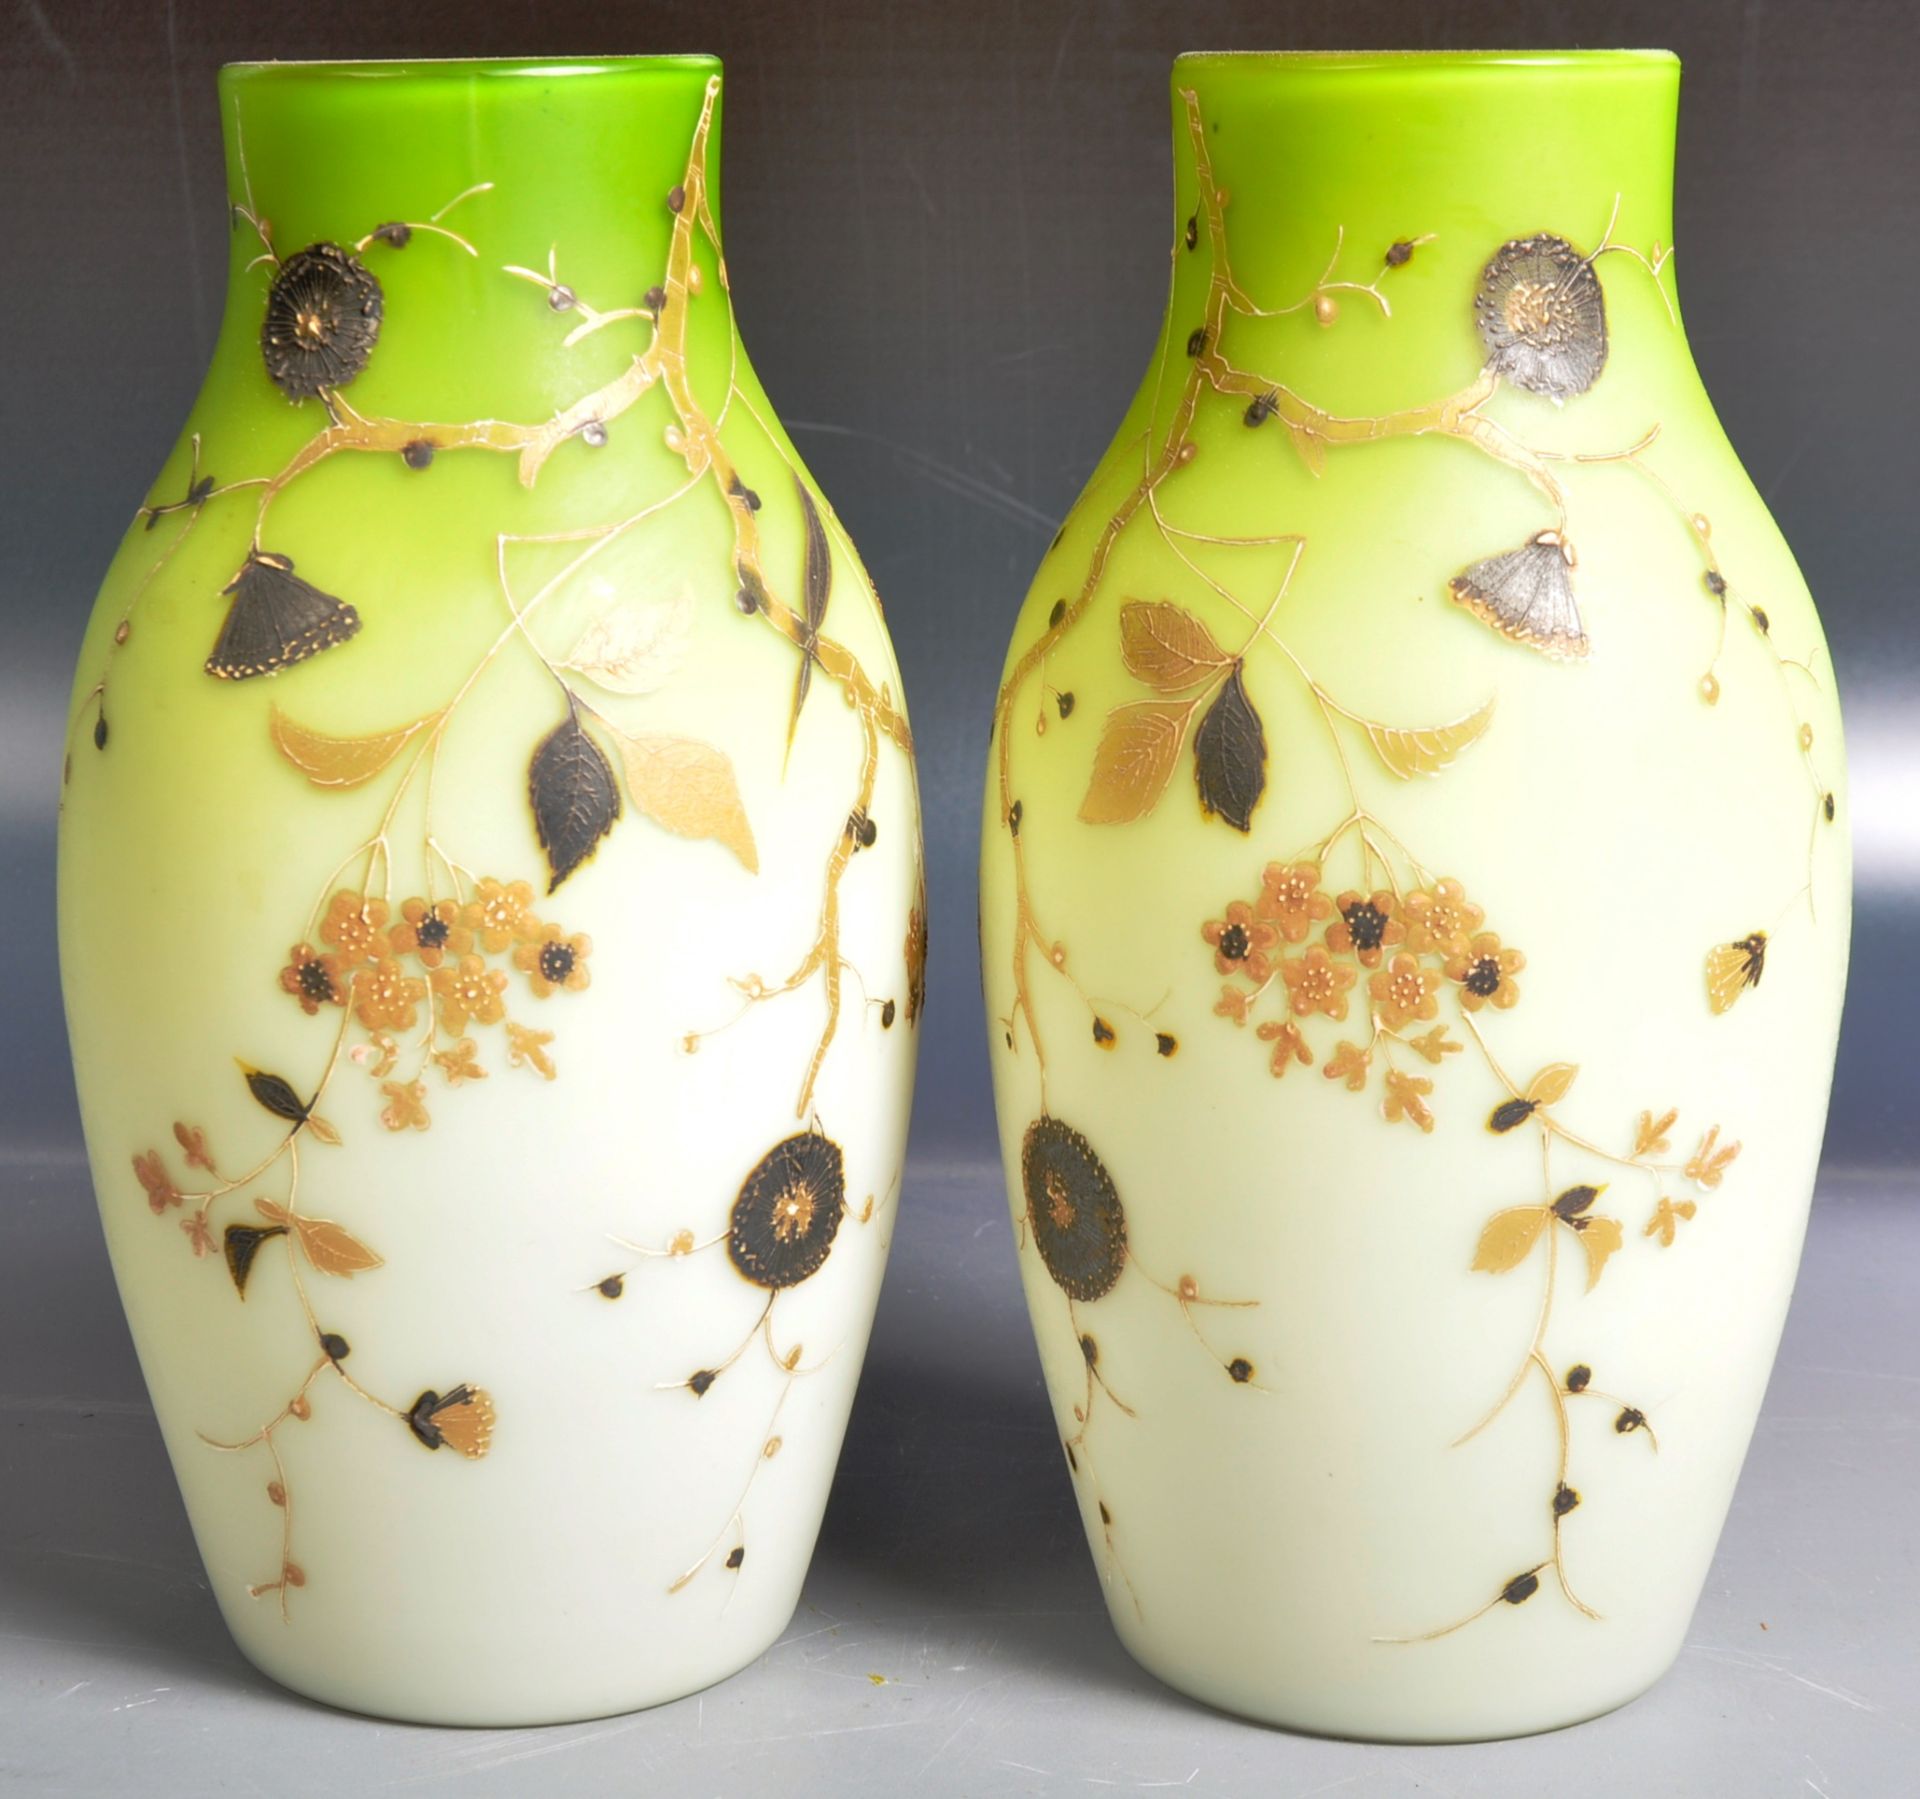 BELIEVED POWELL & SONS - PAIR OF 19TH CENTURY GLASS VASES